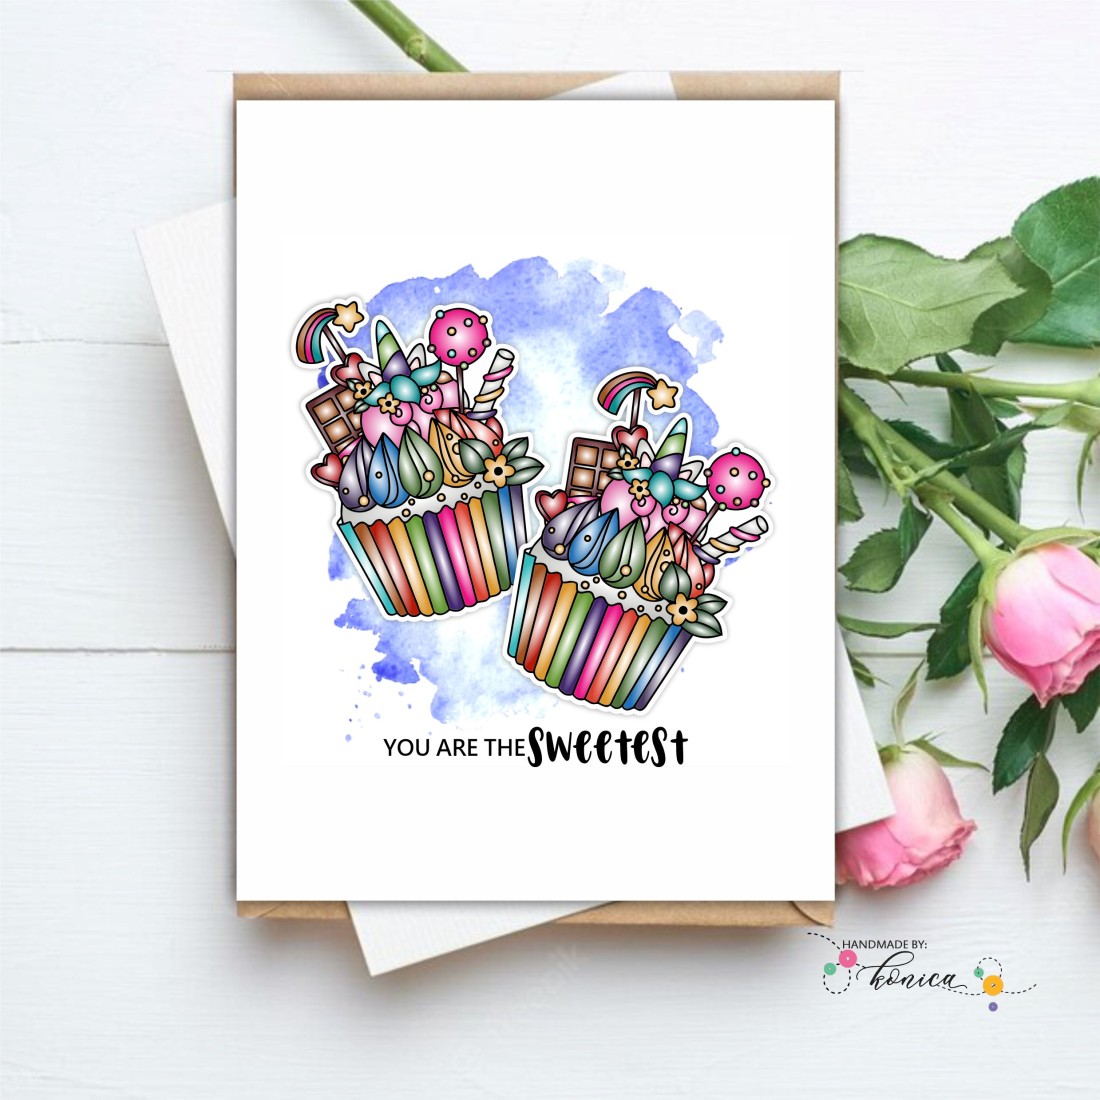 Craftyscrappers Stamps- CUPCAKE ANYONE?